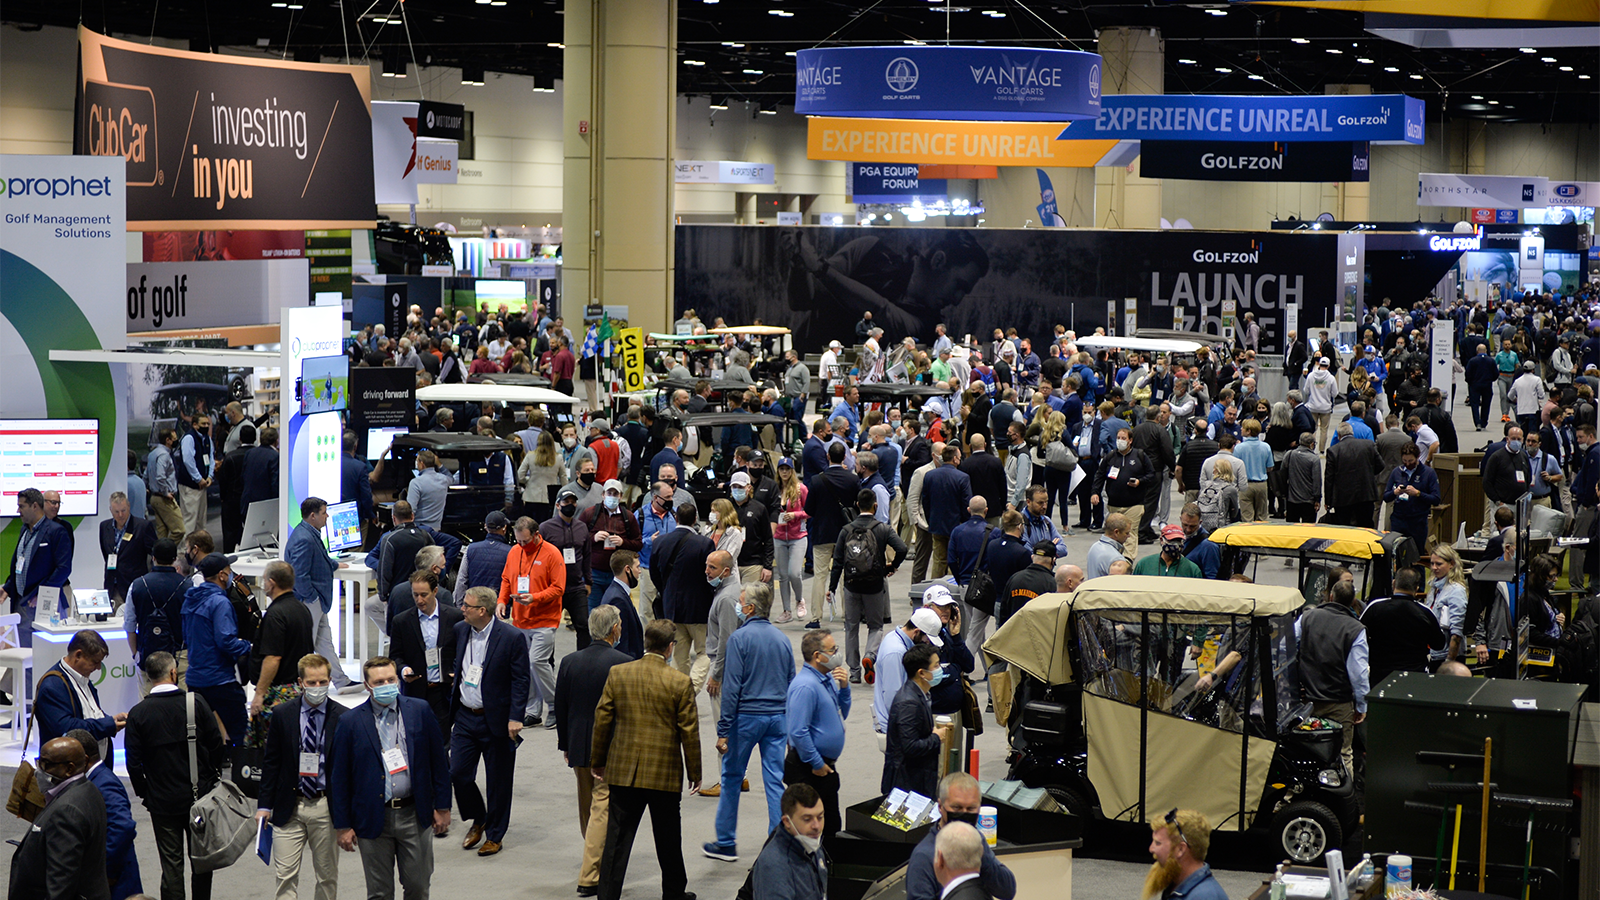 An overview during the 2022 PGA Show at the Orange County Convention Center on January 26, 2022 in Orlando, Florida. (Photo by Montana Pritchard/PGA of America)